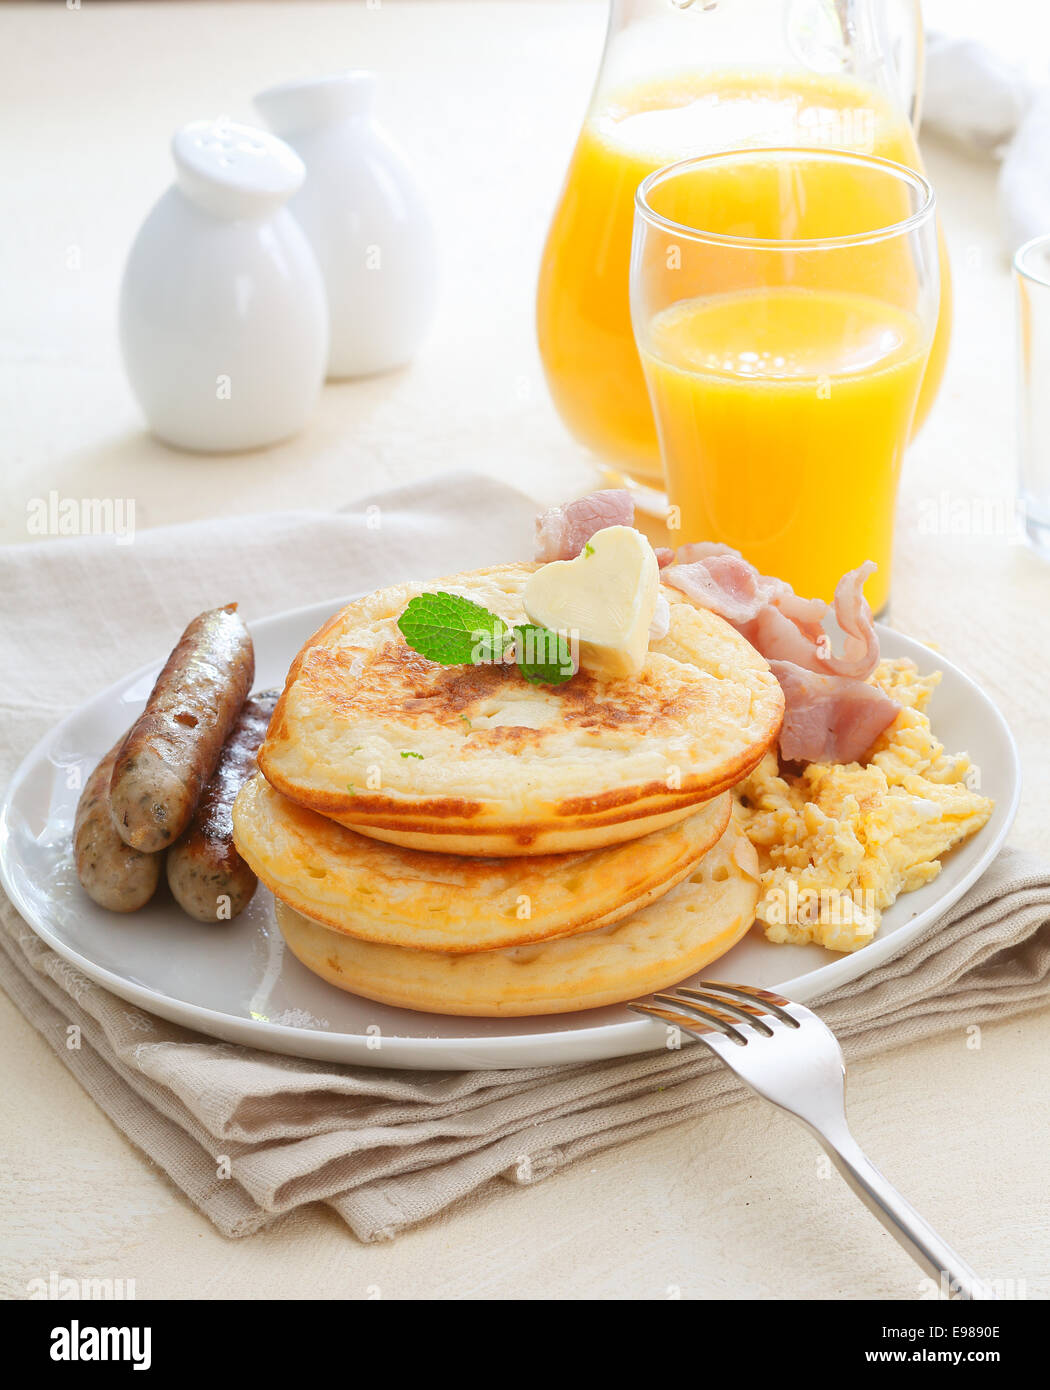 Healthy nutritious breakfast with sausages, eggs , bacon and a stack of golden pancakes served with a glass orange juice on a napkin Stock Photo